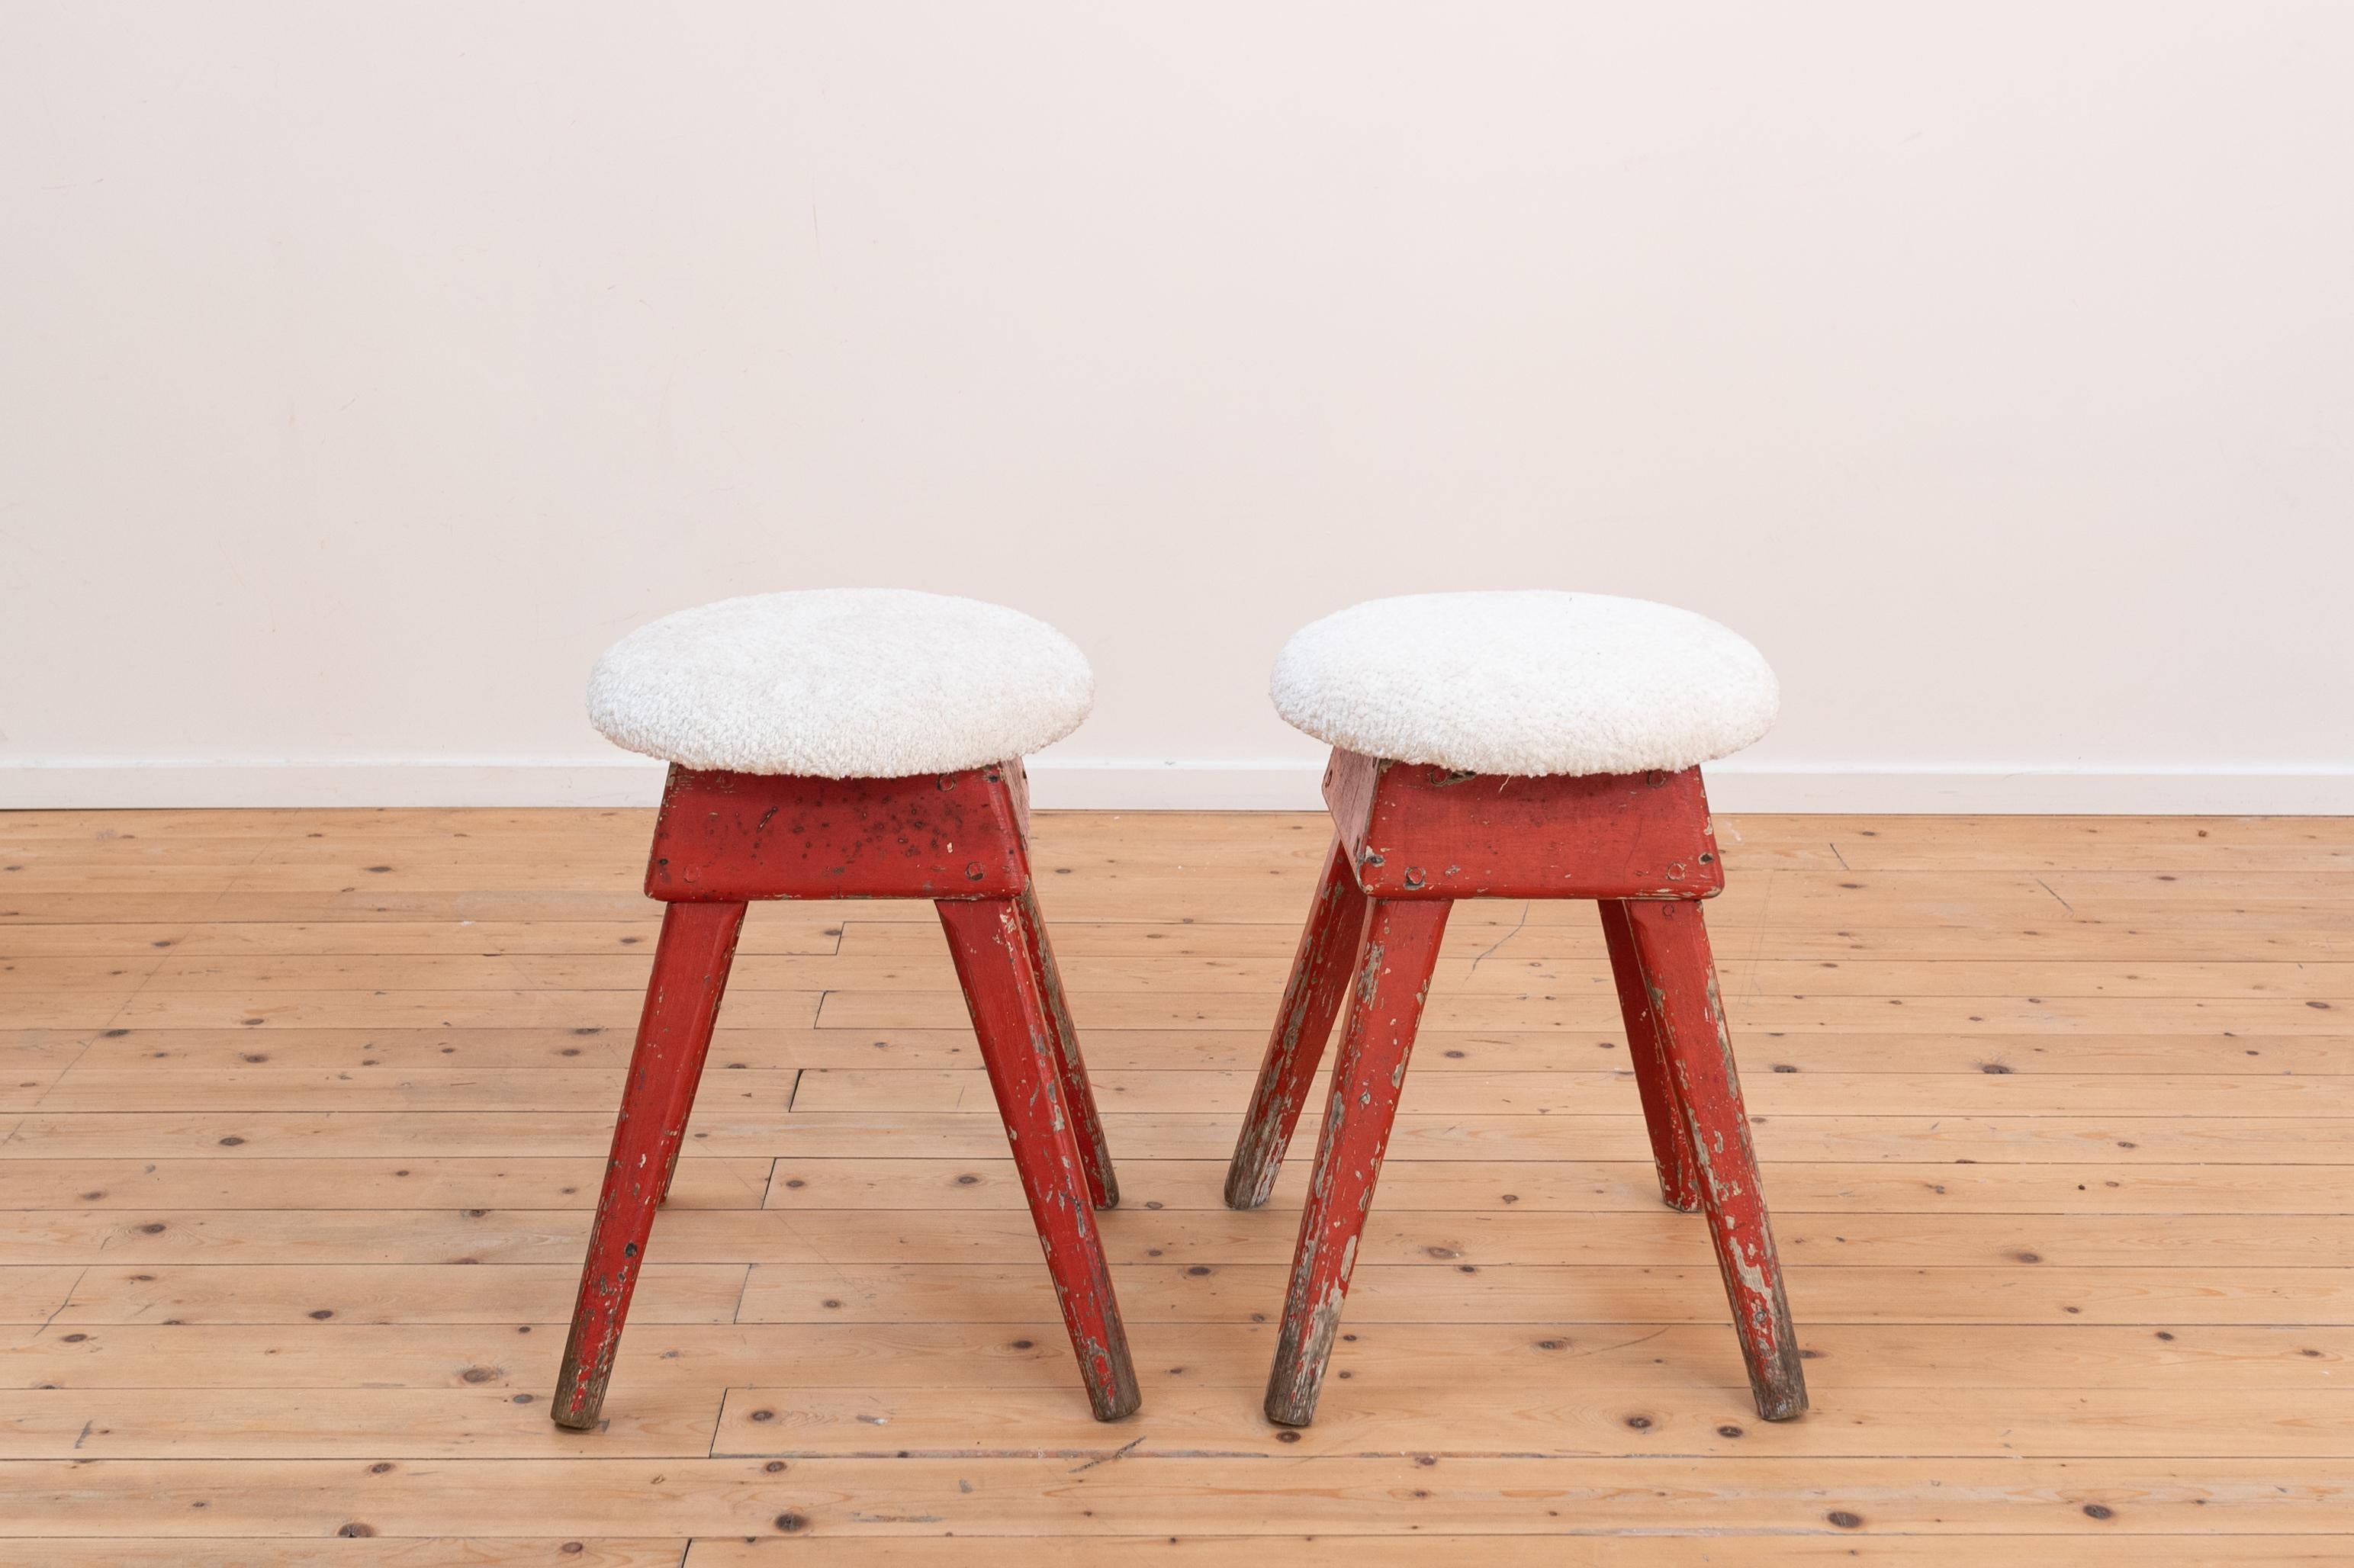 Pair of industrial wooden stool with new wool off-white upholstery. 

The stools were in a workshop and were left in their original state, apart from the new upholstery. The red paint is also authentic. 